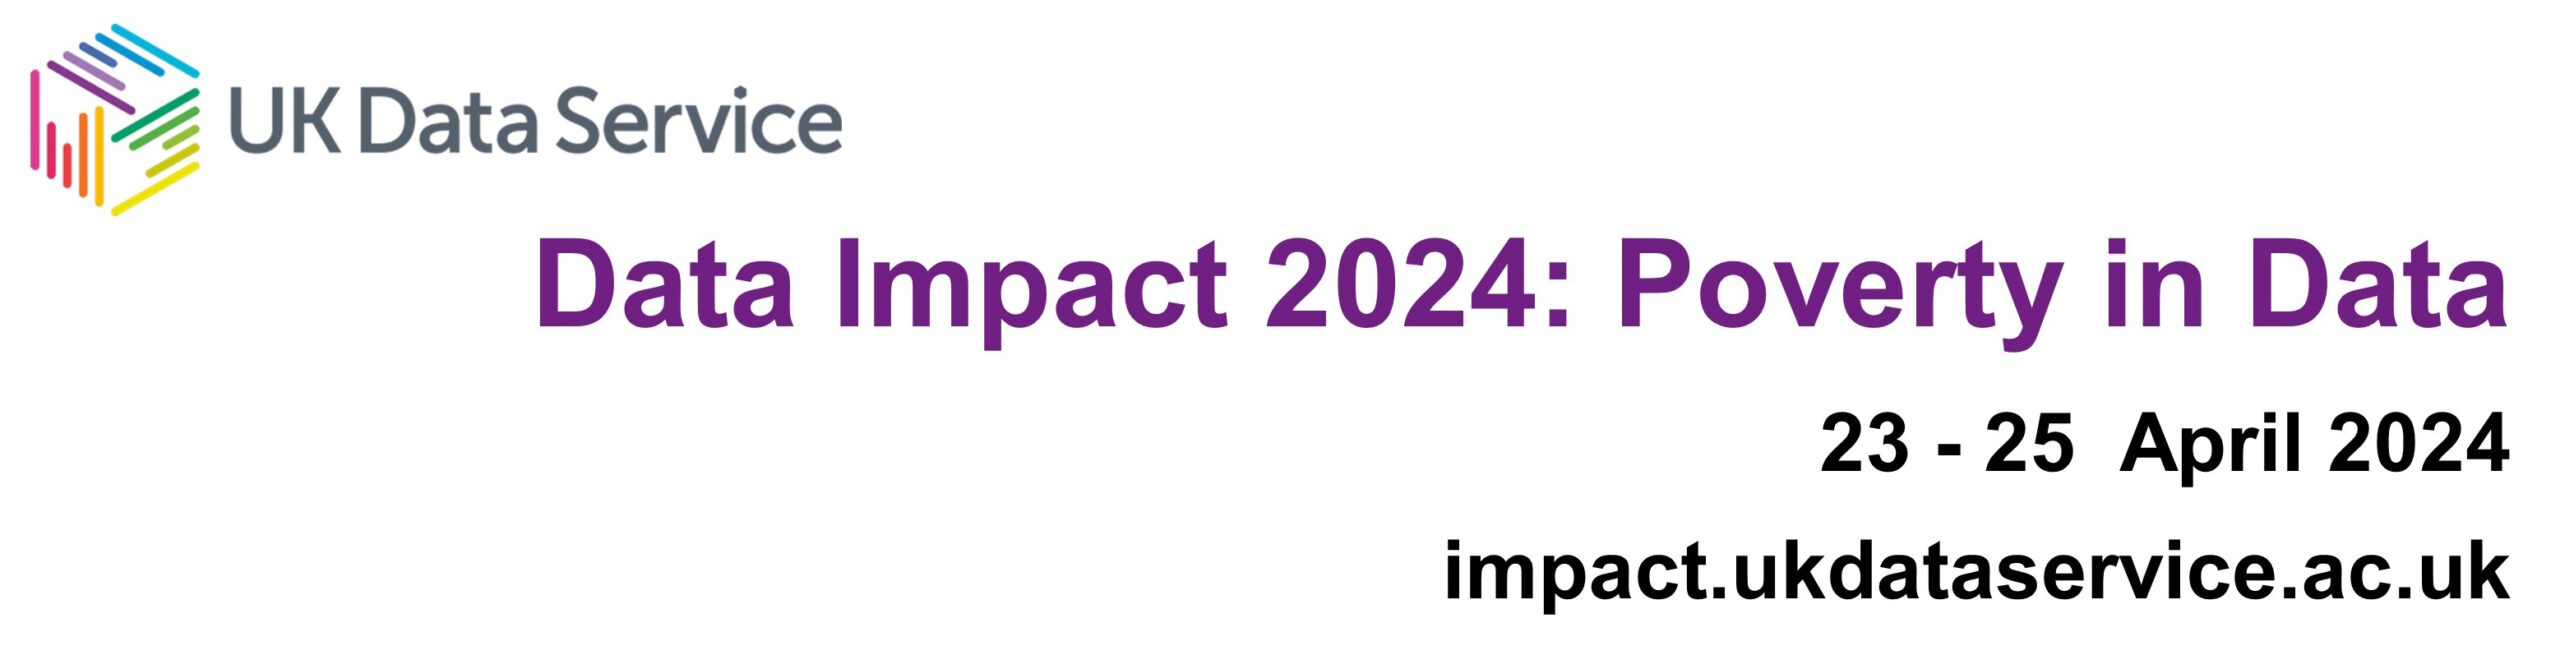 Banner image giving the following information: "Data Impact 2024: Poverty in Data, 23 - 25 April 2034, impact.ukdataservice.ac.uk"